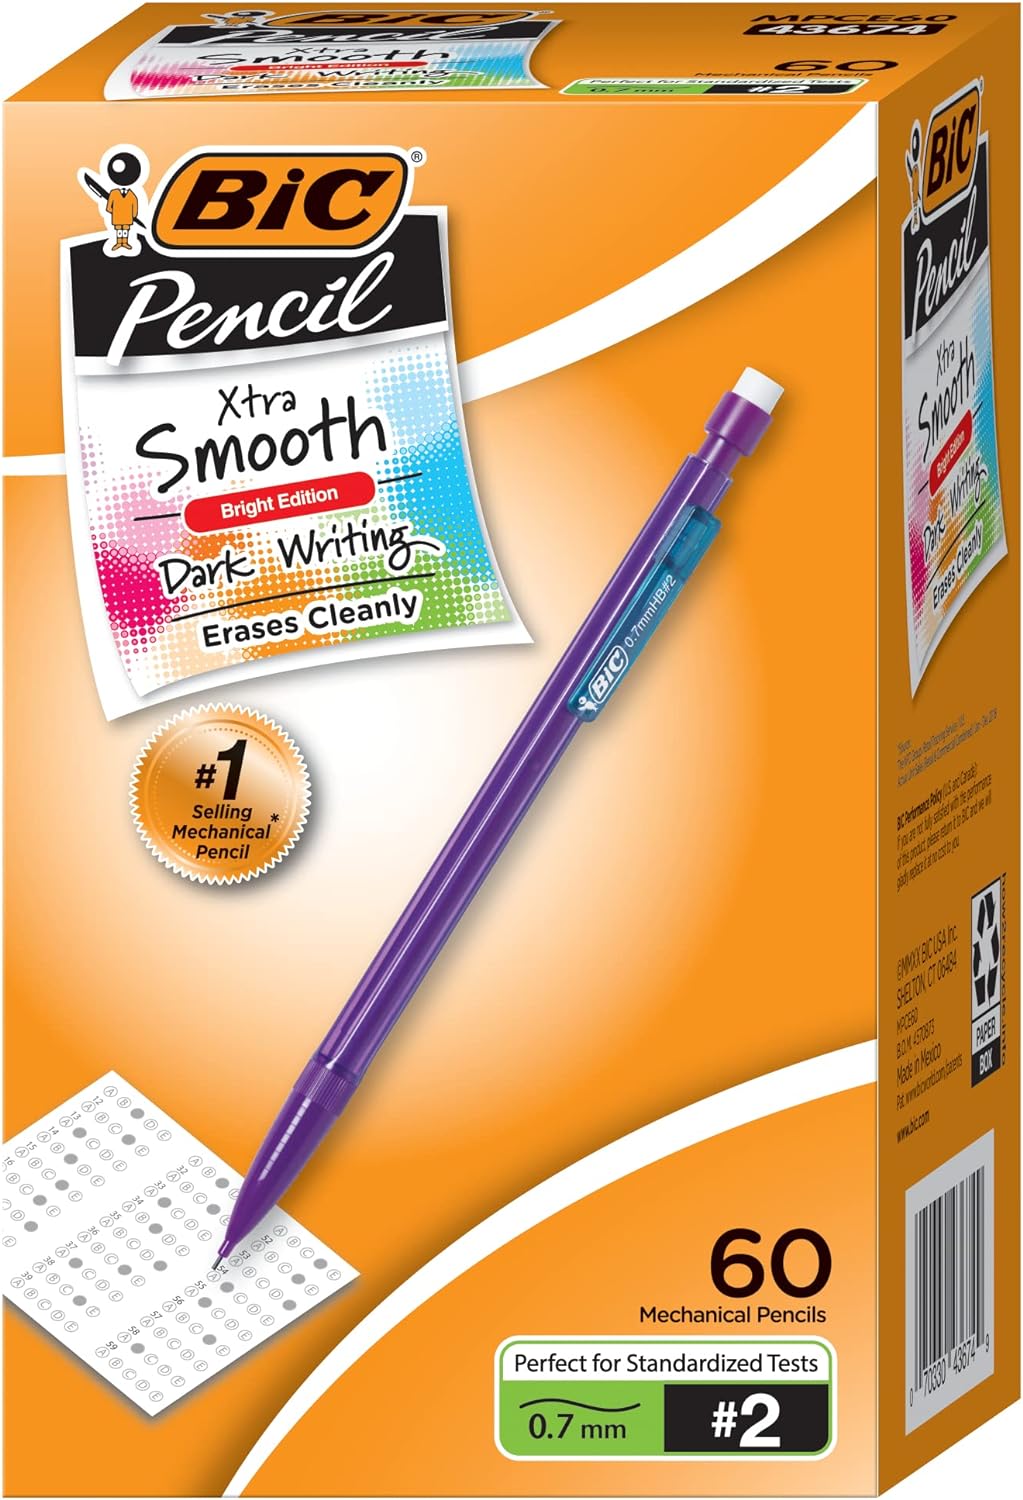 BIC Xtra-Smooth Mechanical Pencils with Erasers, Bright Edition Medium Point (0.7mm), 60-Count Pack, Bulk Mechanical Pencils for School or Office Supplies